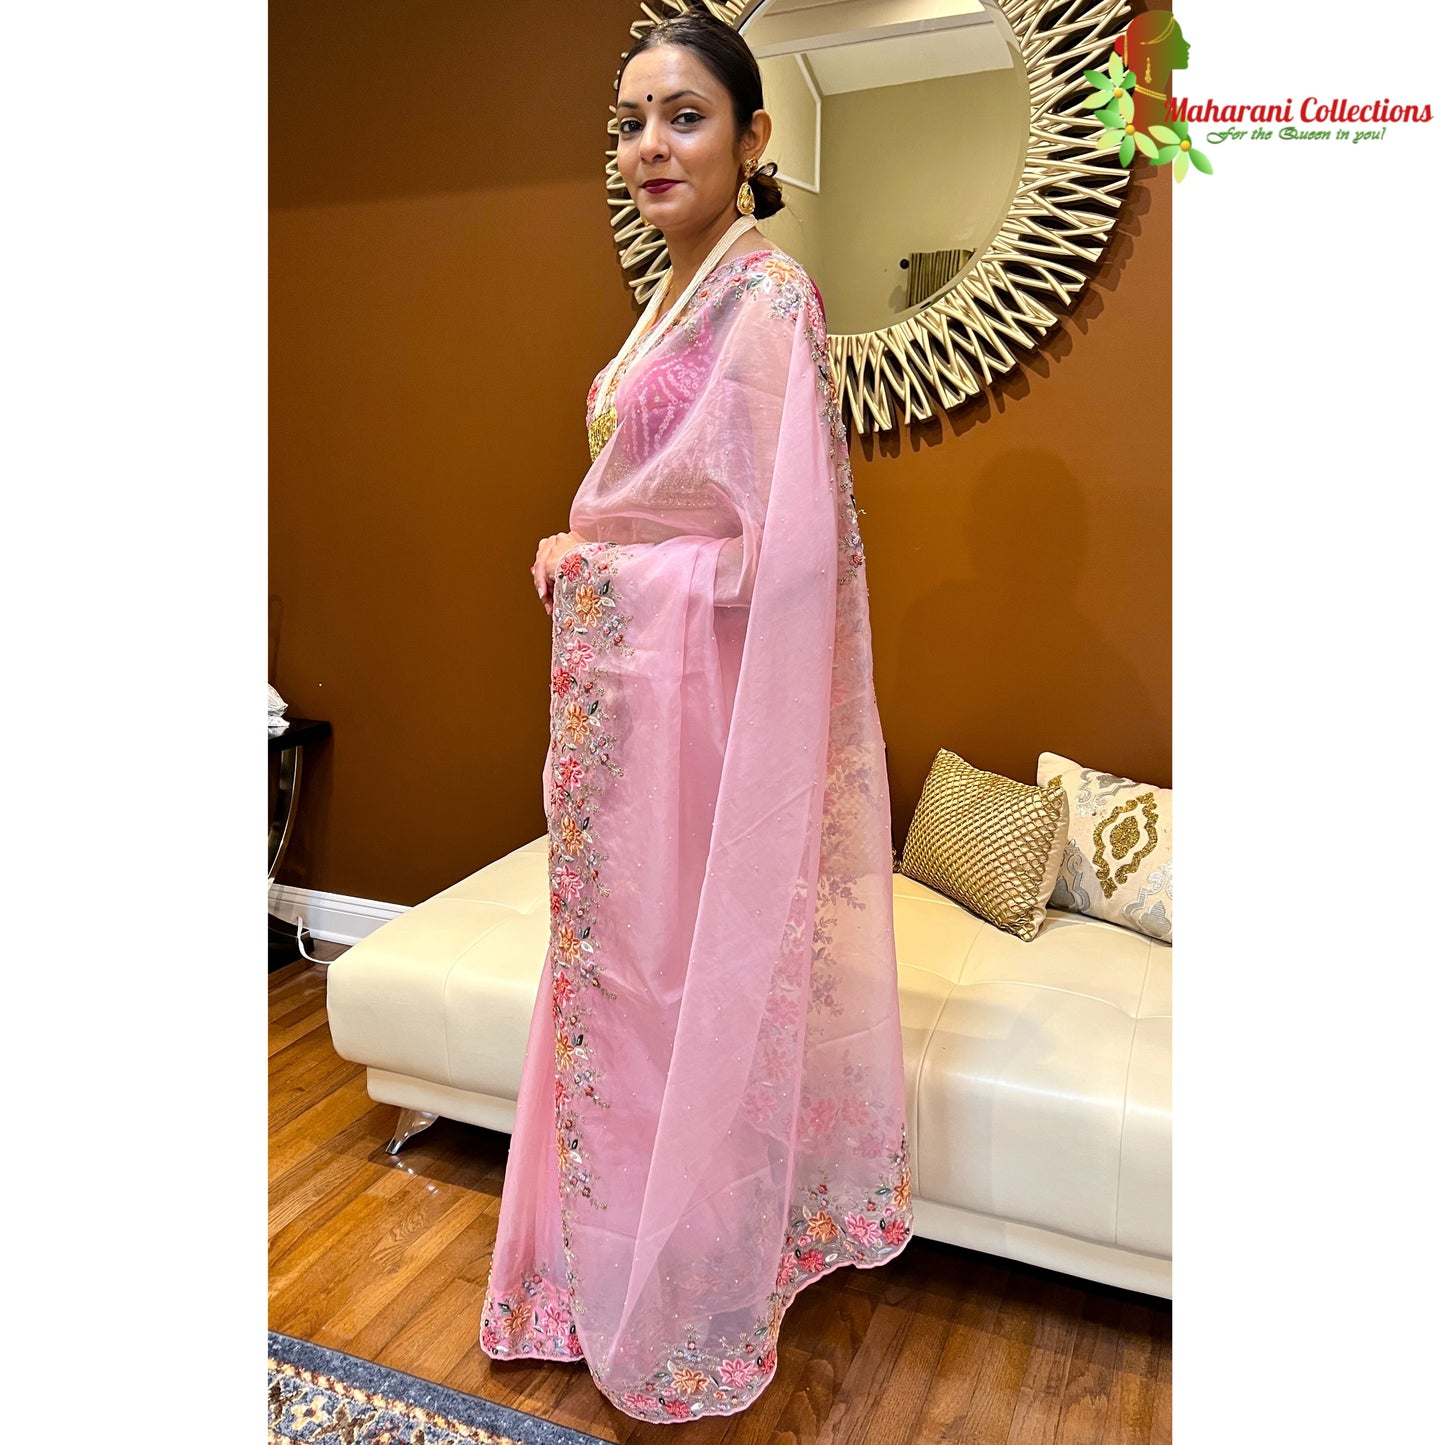 Maharani's Designer Party Wear Organza Saree - Pink (with Stitched Petticoat)